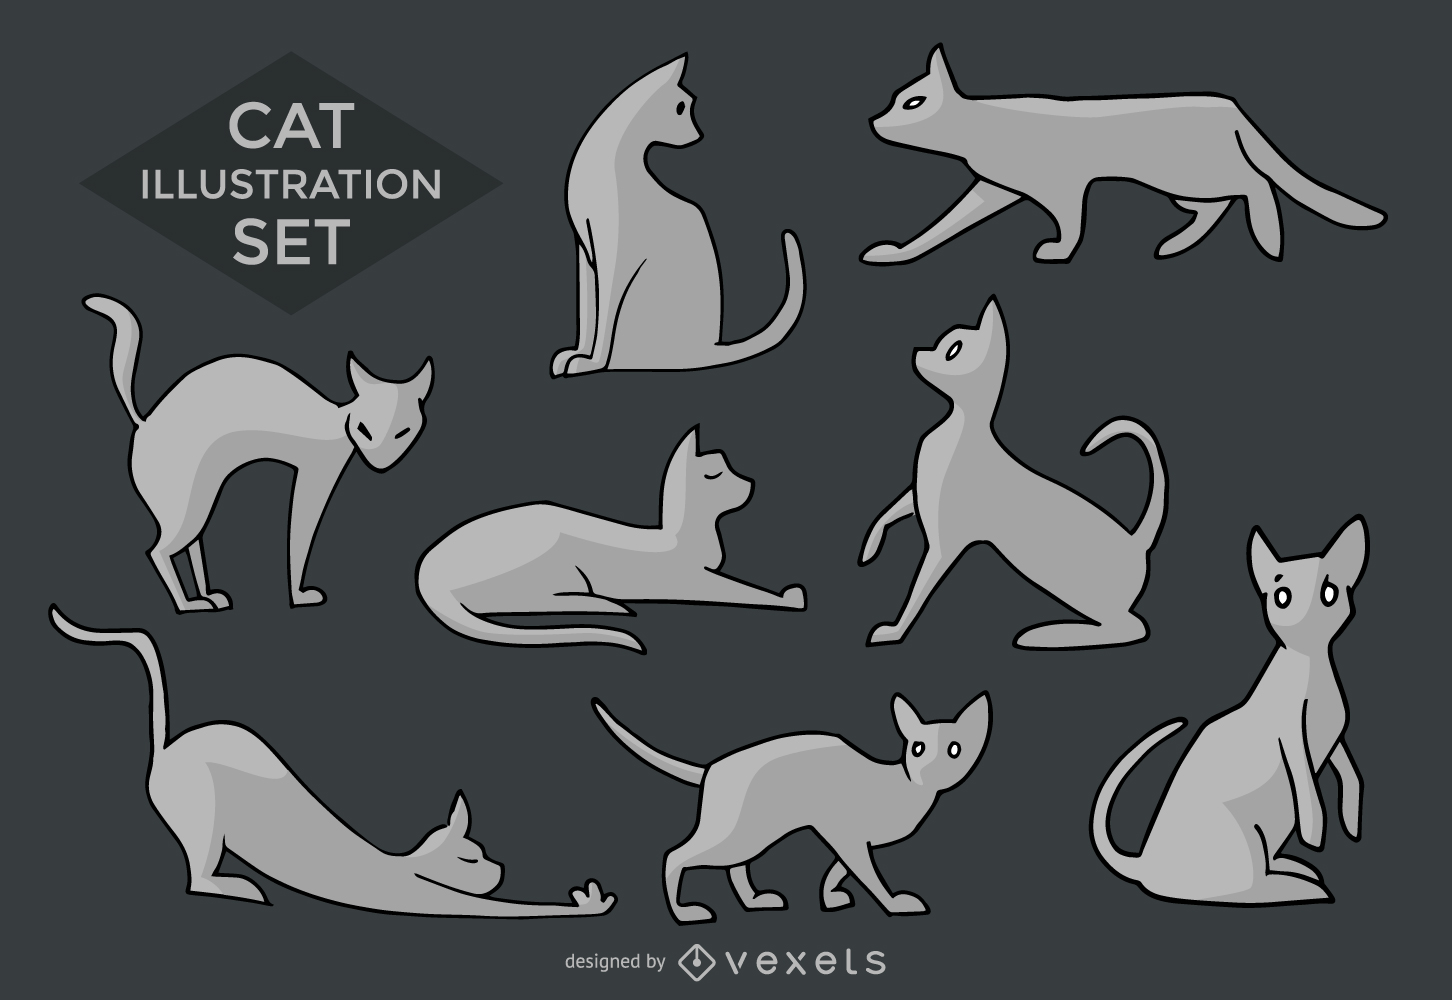 Cat silhouettes and illustrations